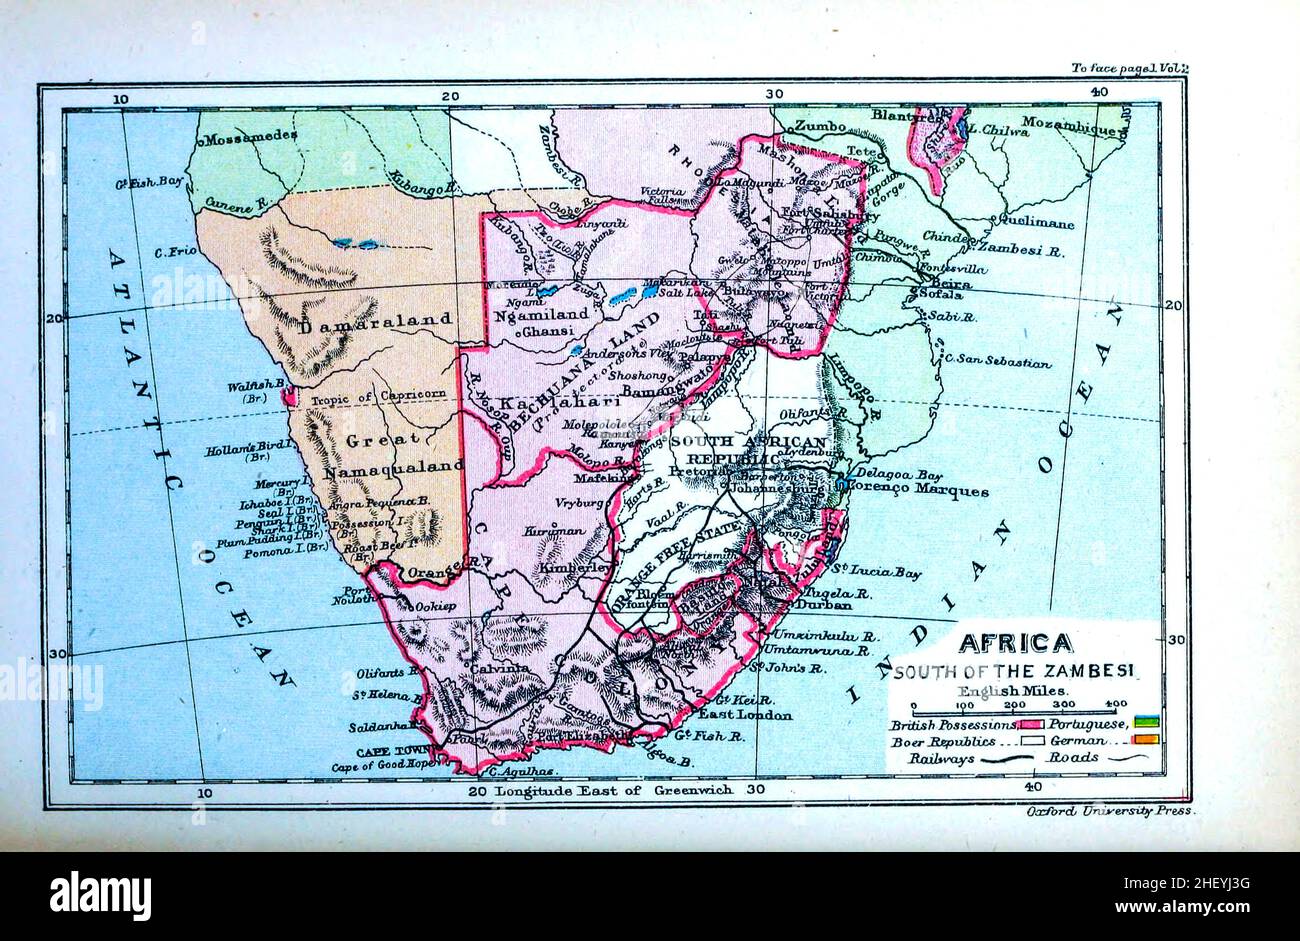 Map of Africa South of the Zambesi The Zambezi River (also spelled Zambeze and Zambesi) from the book HISTORICAL GEOGRAPHY OF THE BRITISH COLONIES printed in 1897 Stock Photo